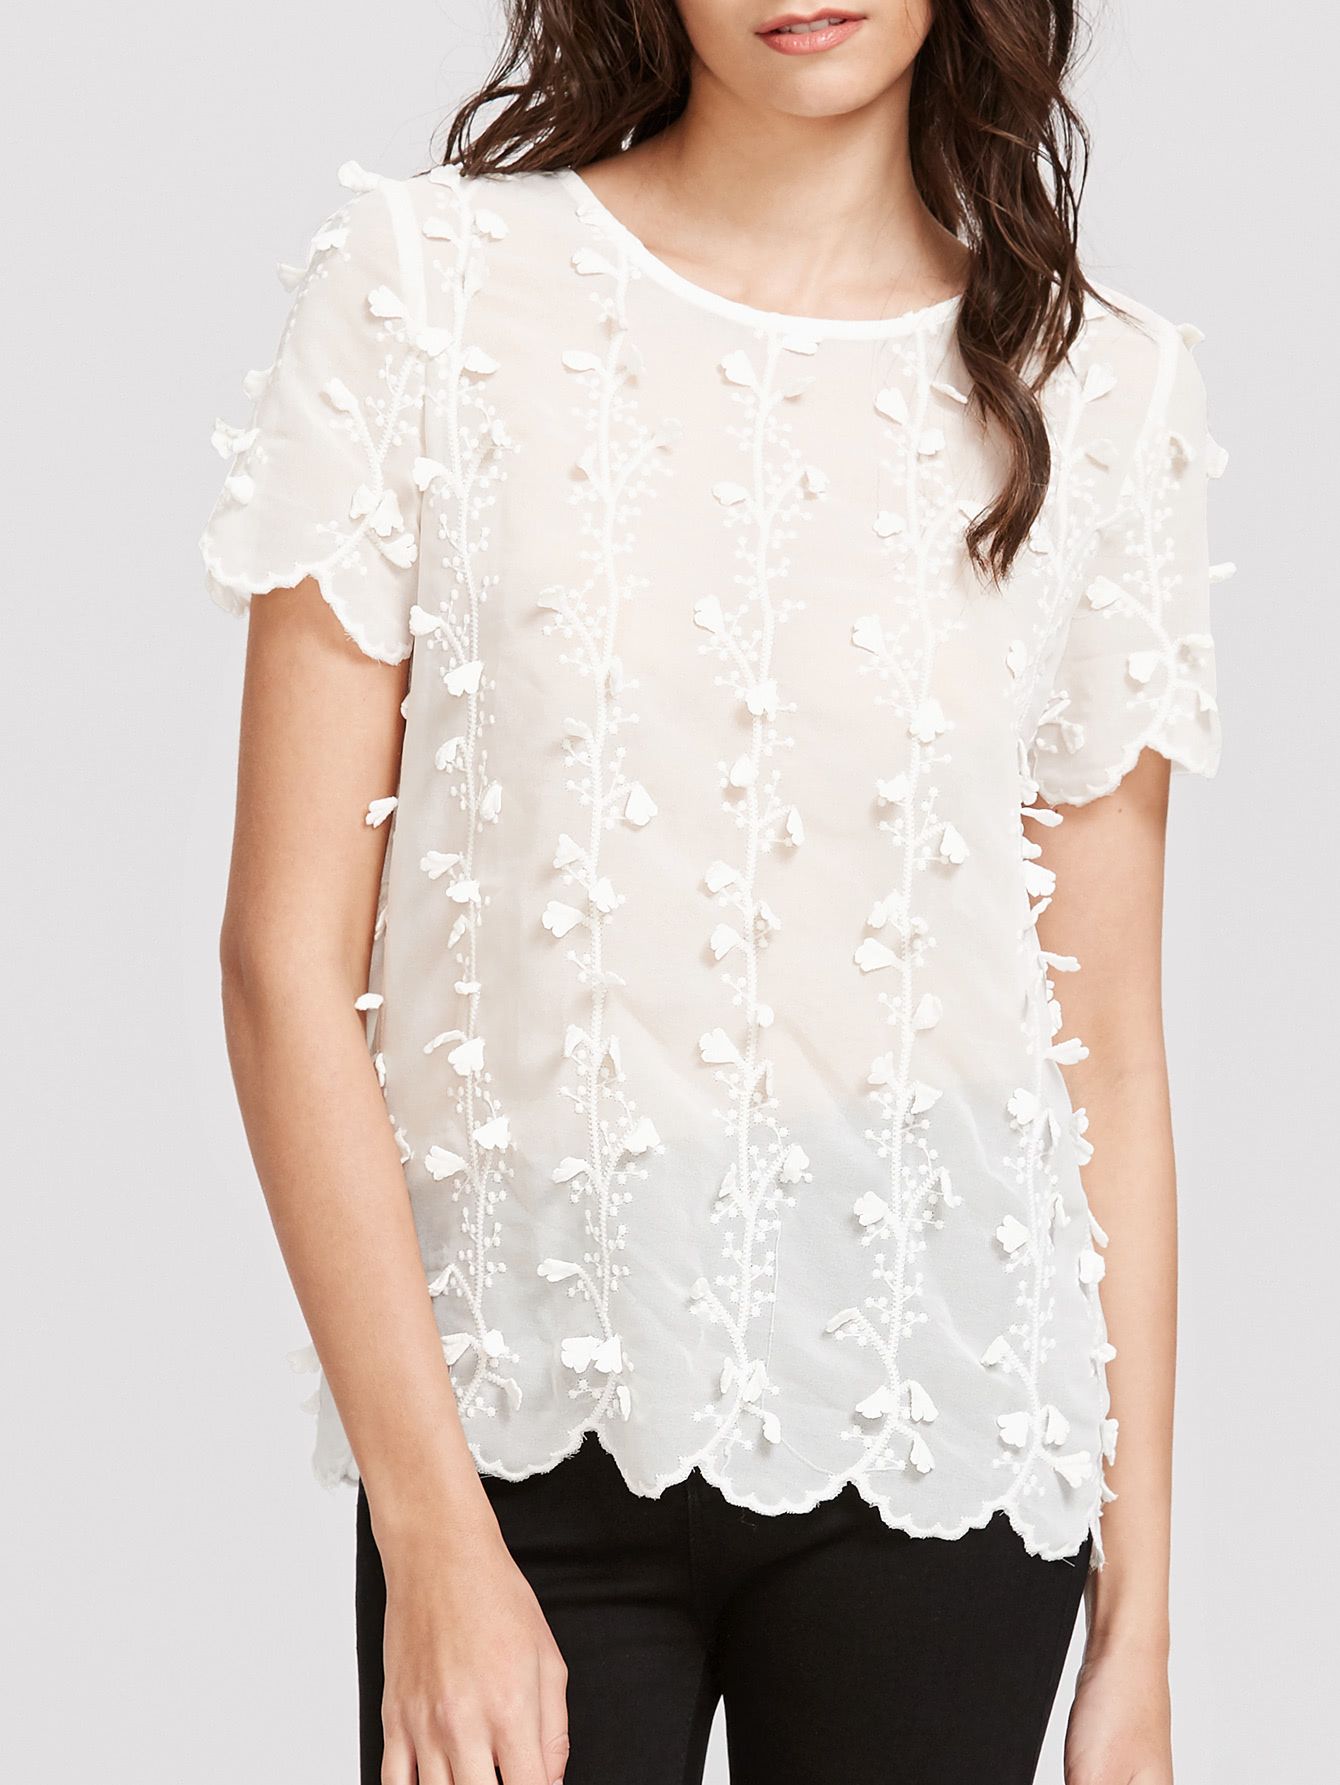 White Botanical Applique Embroidered Top | SHEIN